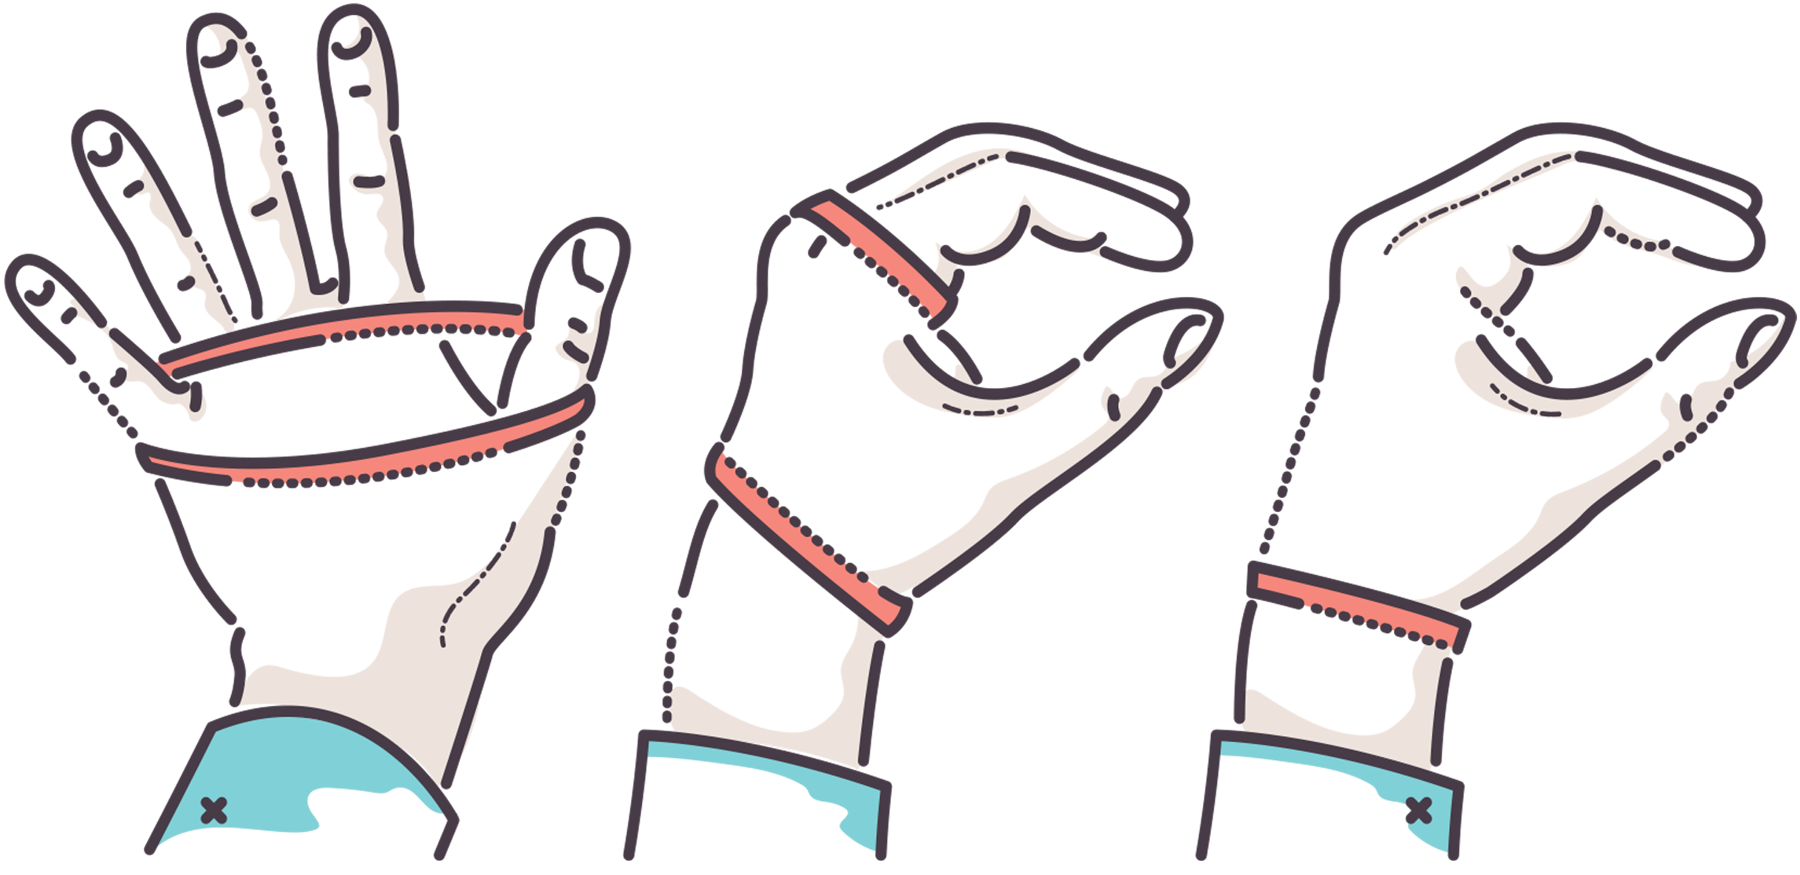 An illustration of elastic bands wrapped around hands.